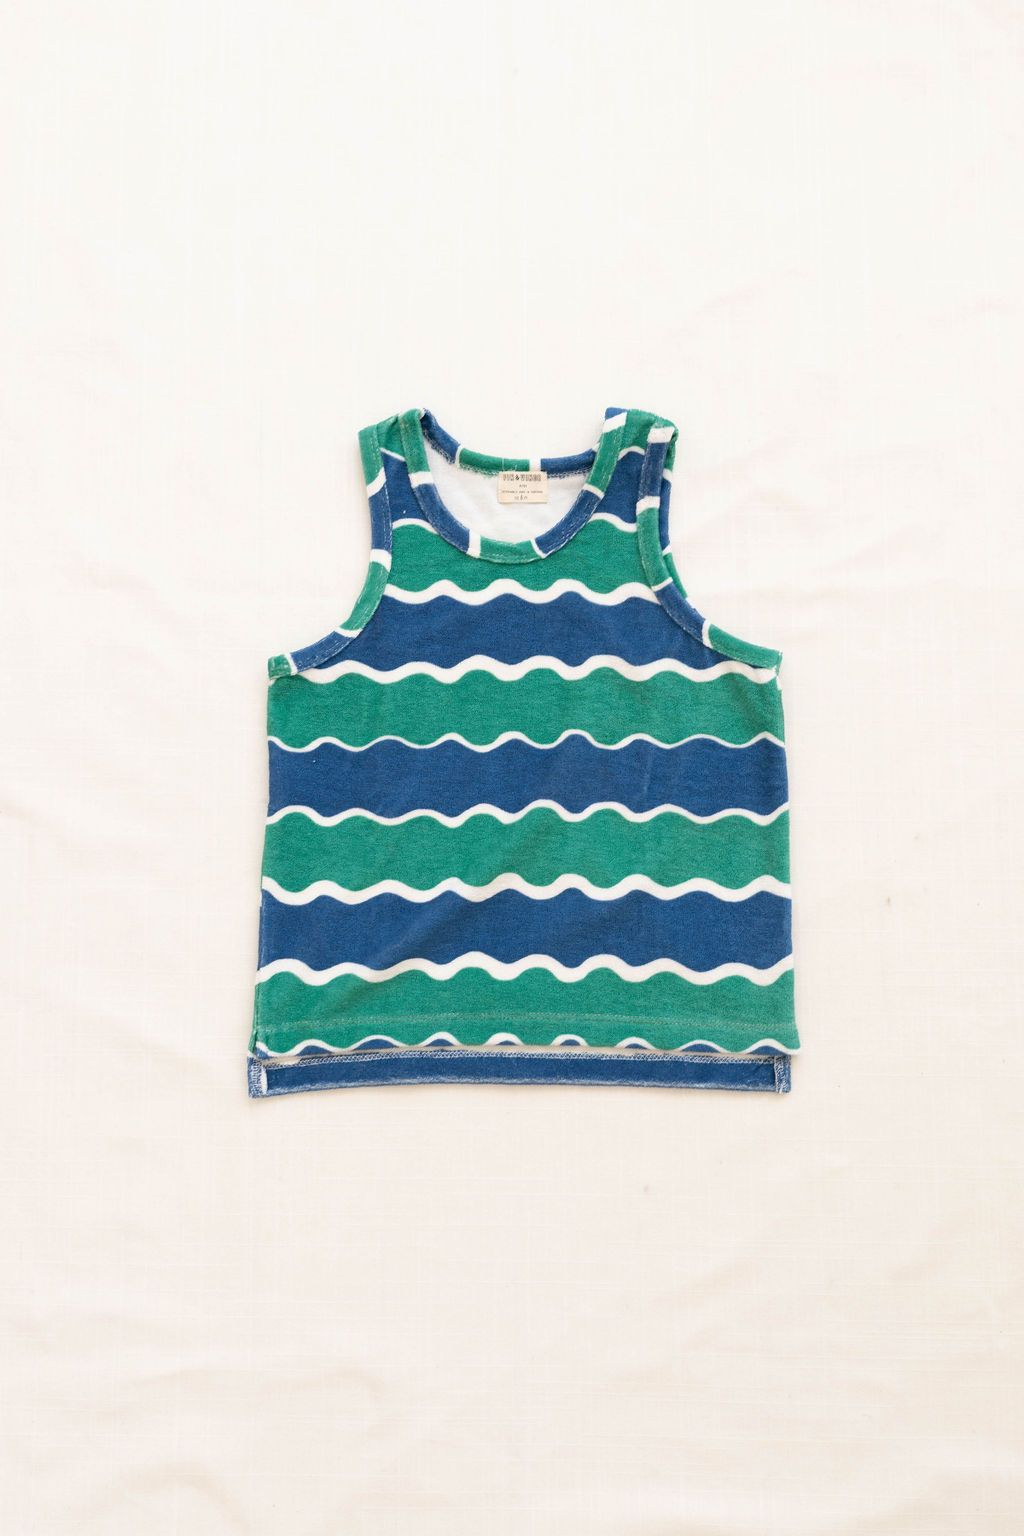 Fin & Vince Terry Tank Top, Waves – Wild Ivy